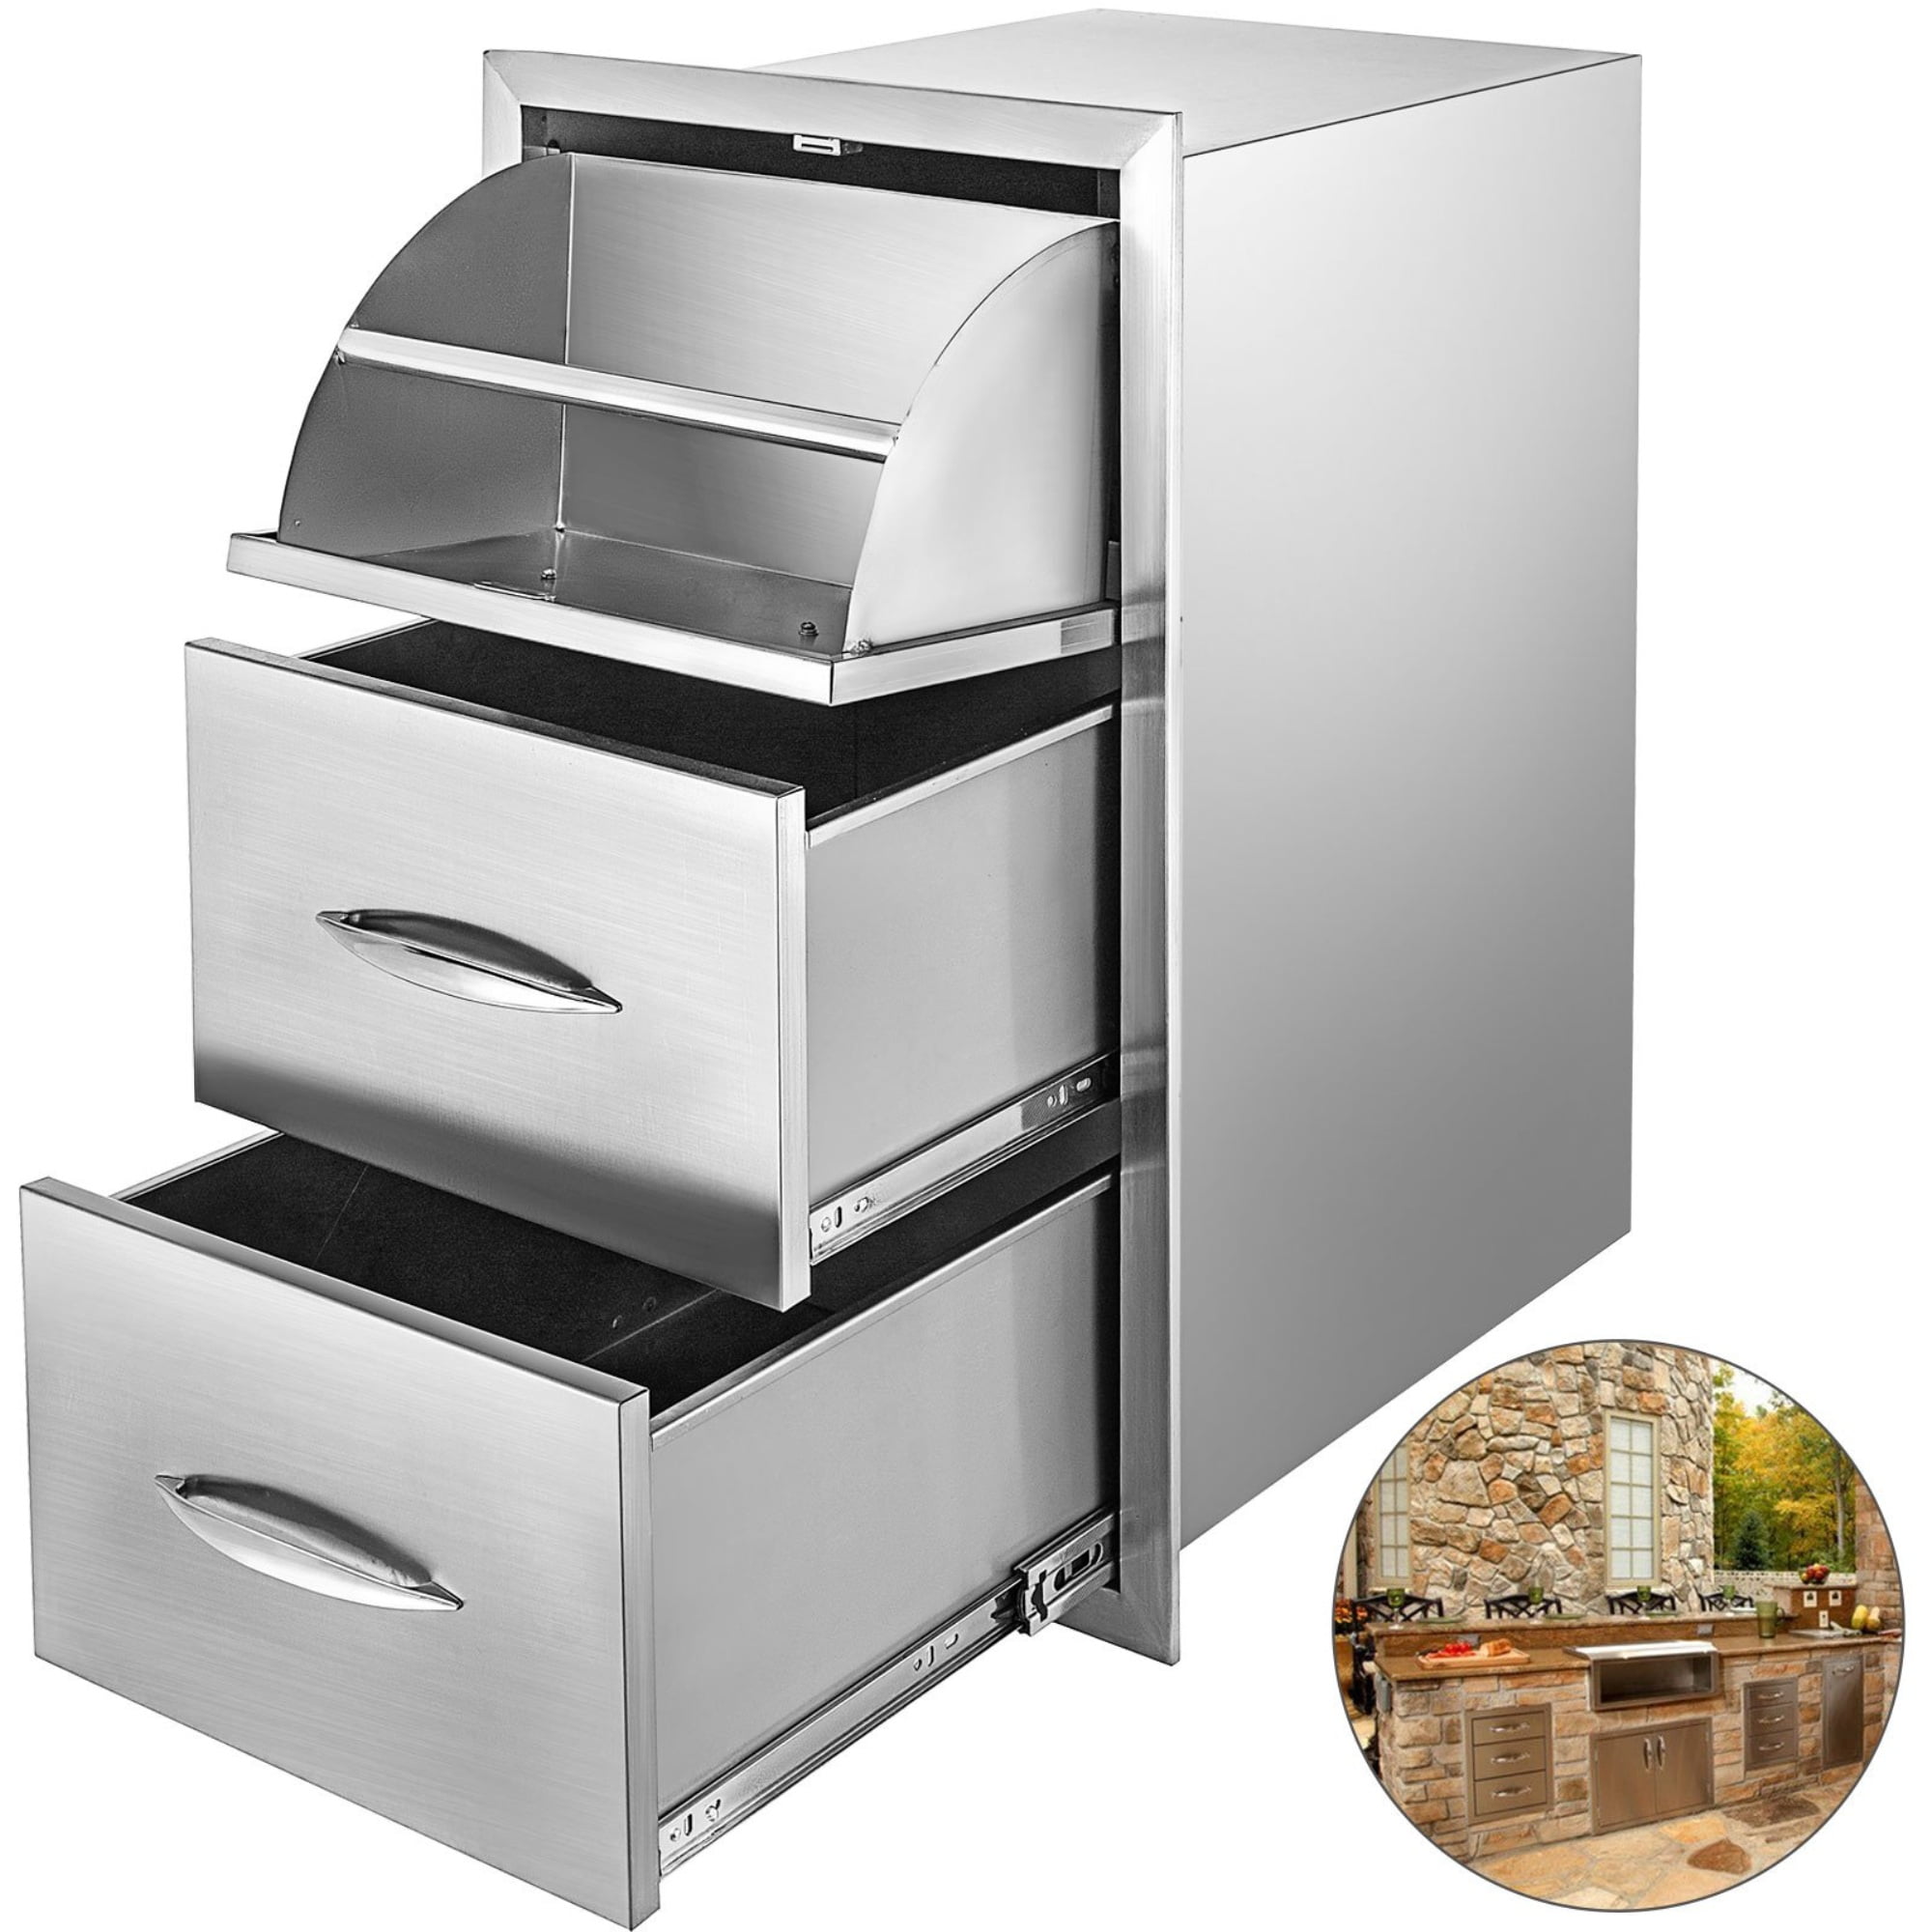 30"x17" BBQ Stainless Steel Triple Drawers Drawer Tracks Access  Outdoor Kitchen 